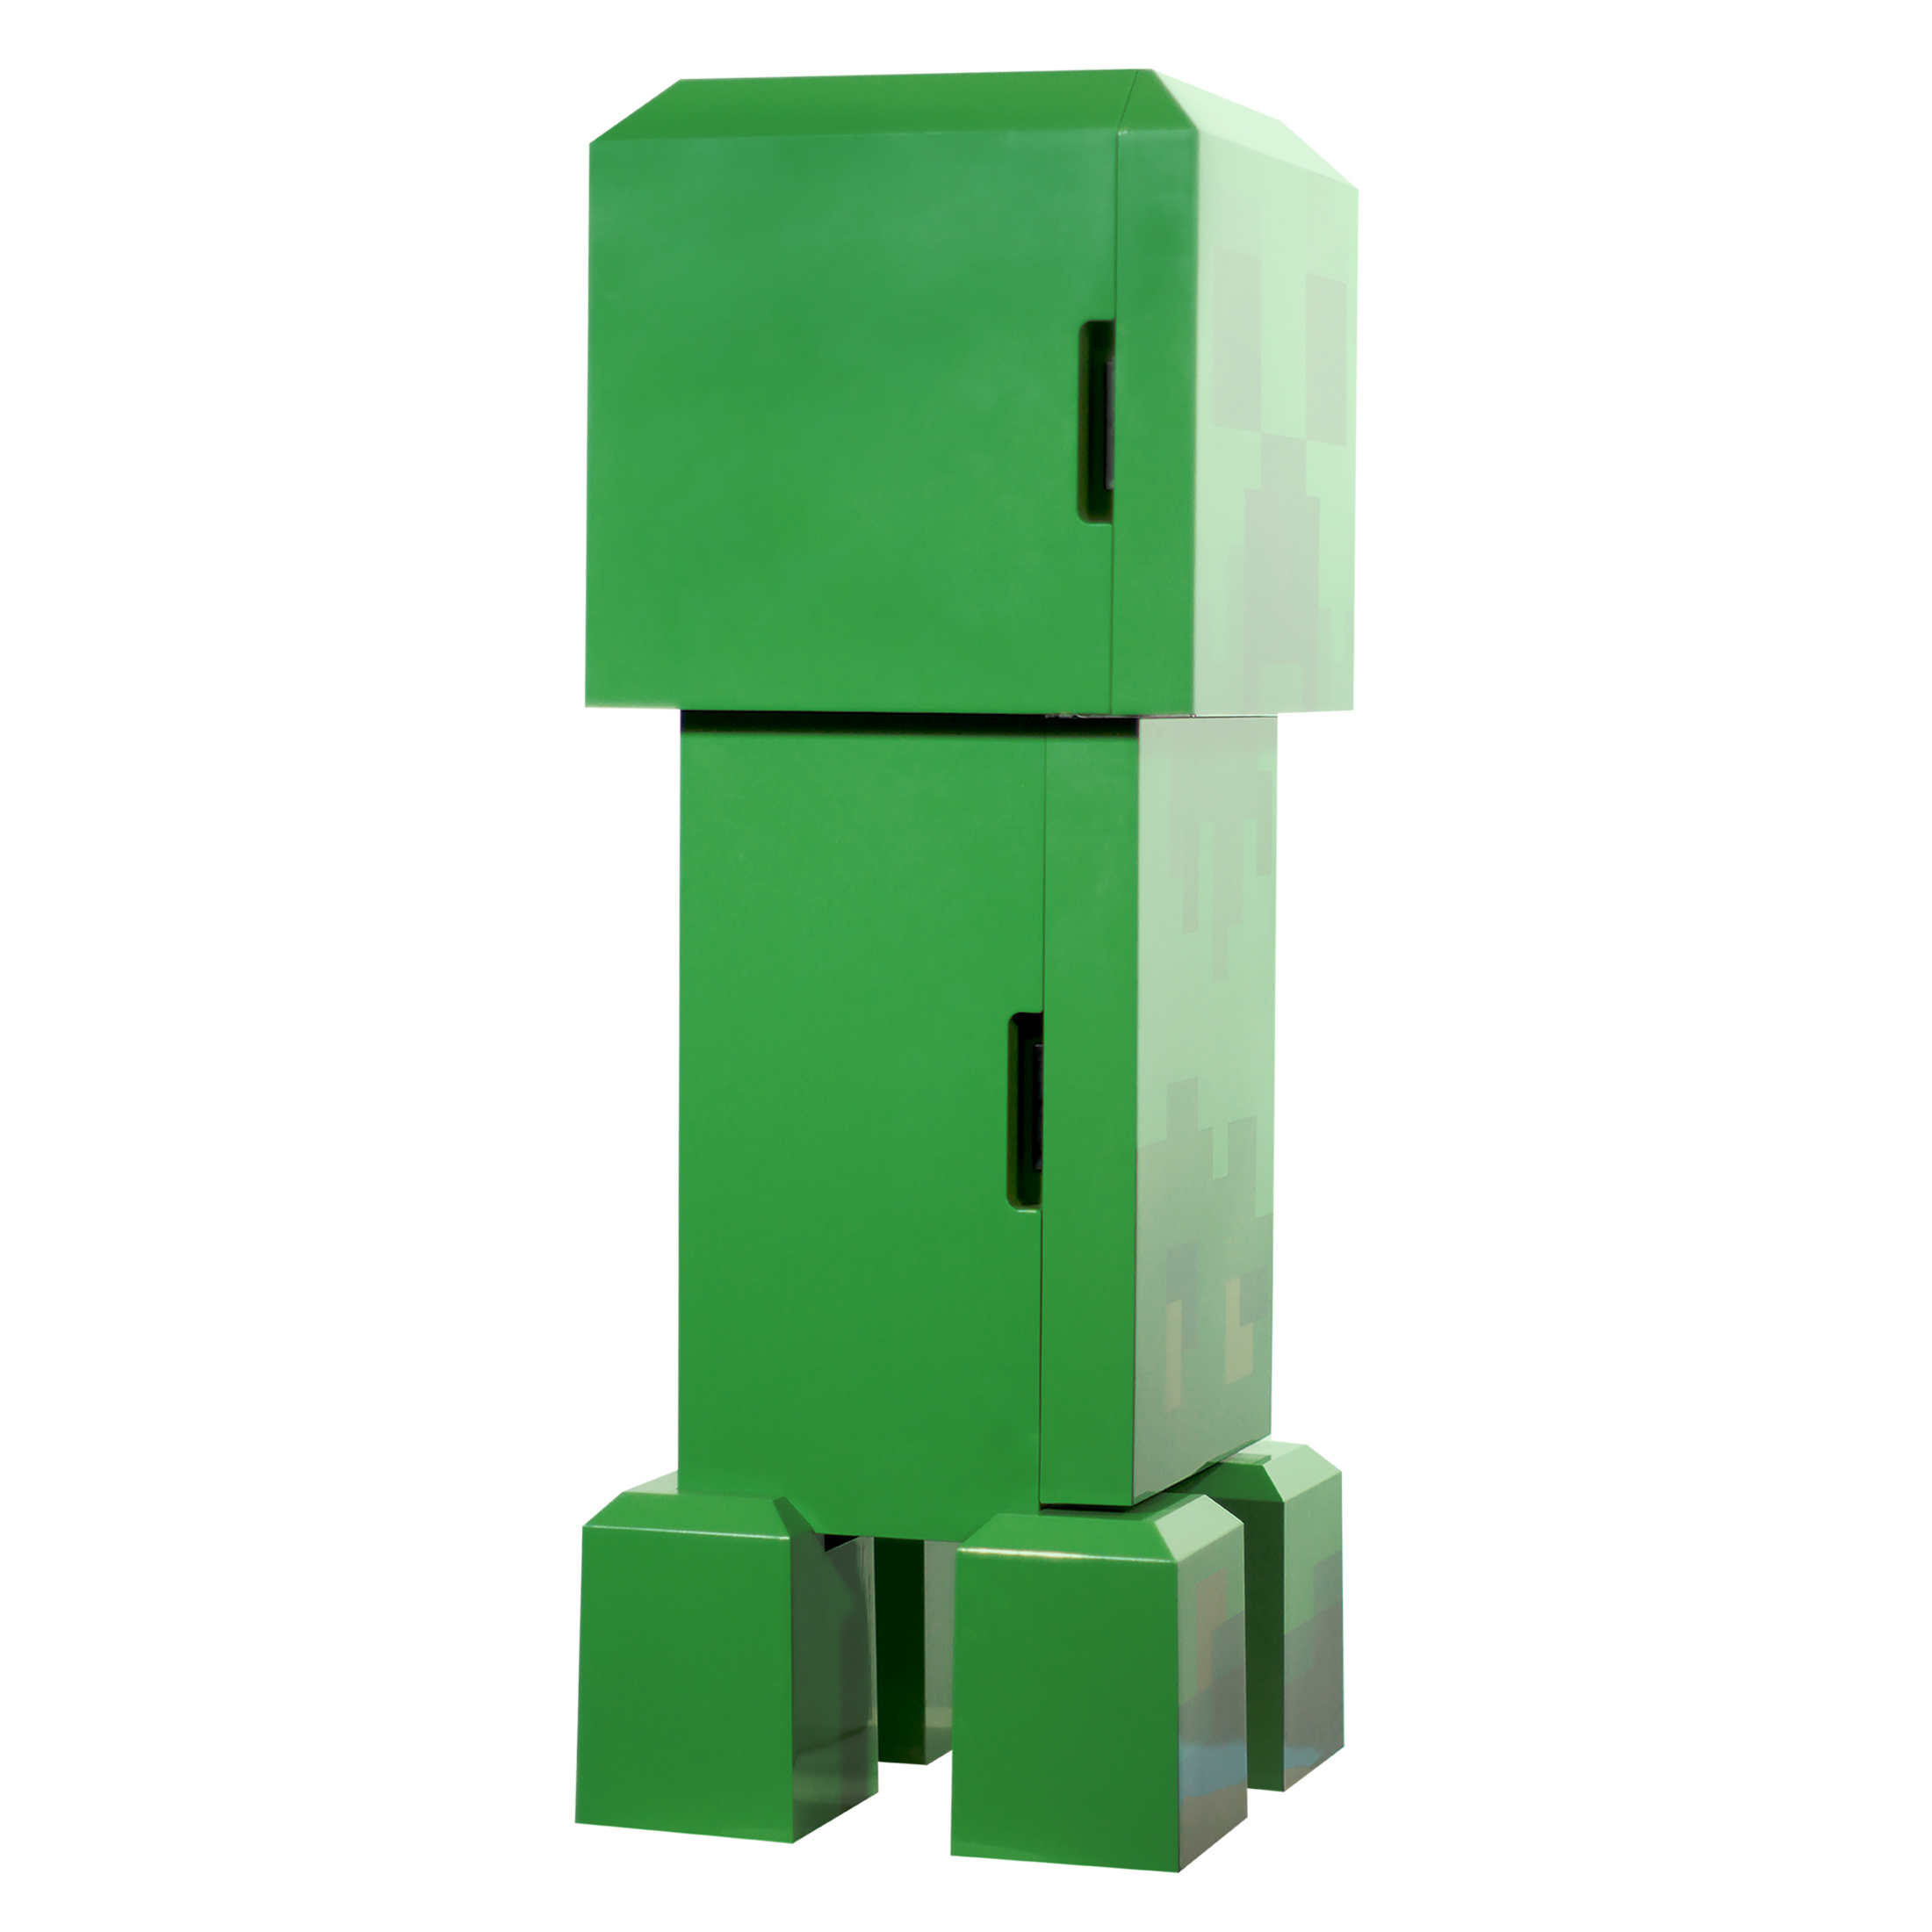 Price Errors on X: $113 off Minecraft Creeper Mini Fridge Normally retails  for $168 but on sale at Walmart now for only $55. Resells on  around  $100, also risk free because